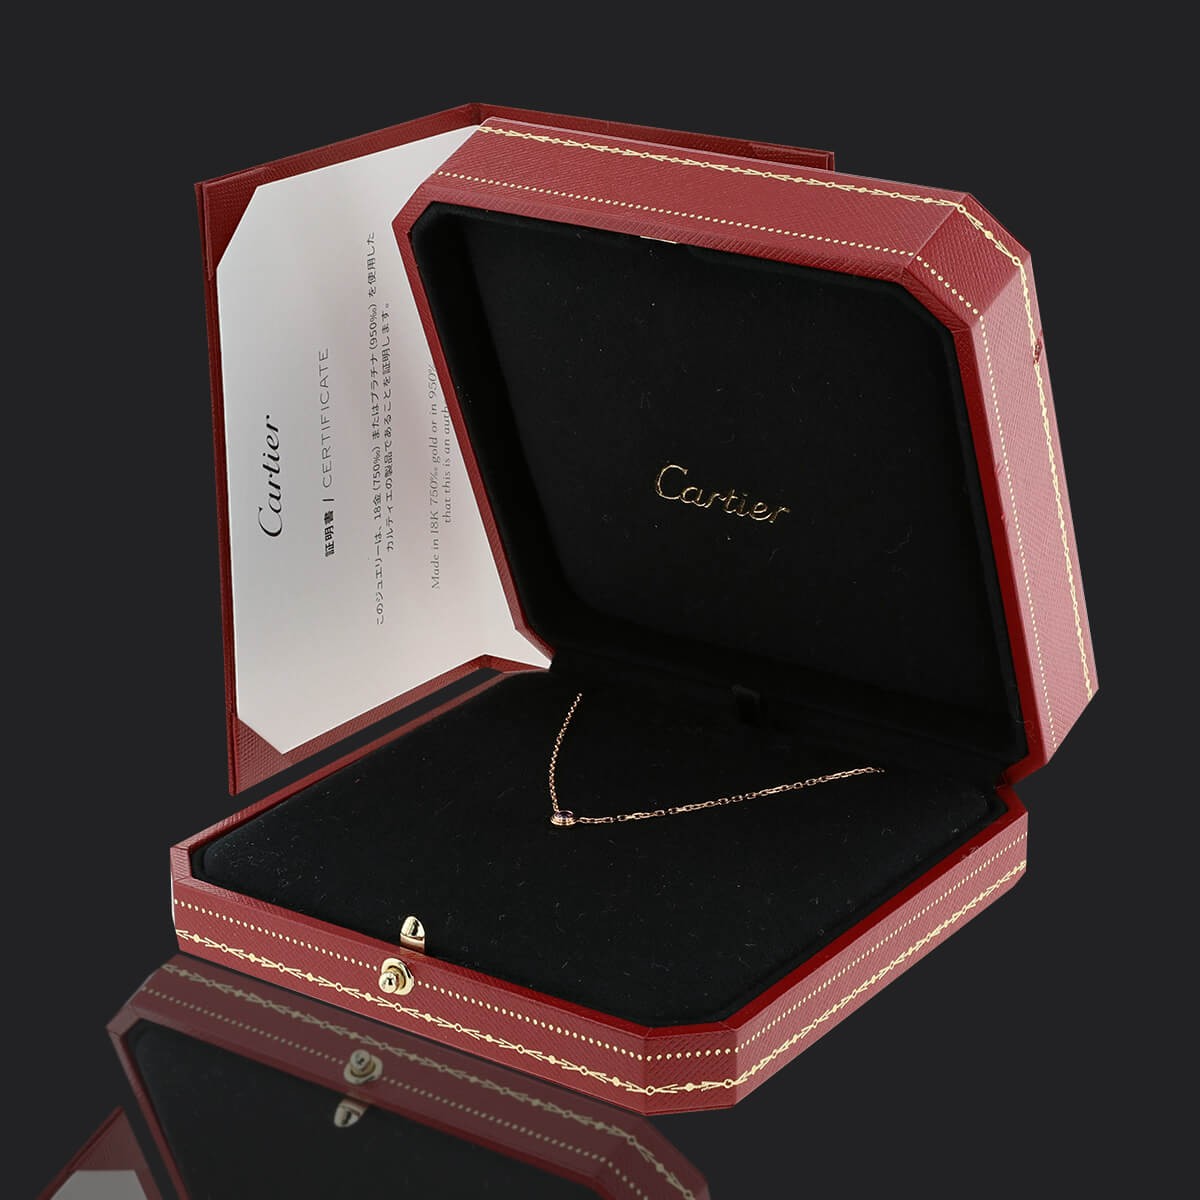 Cartier Necklace - Damour SM Necklace - Rose gold Diamond - Catawiki